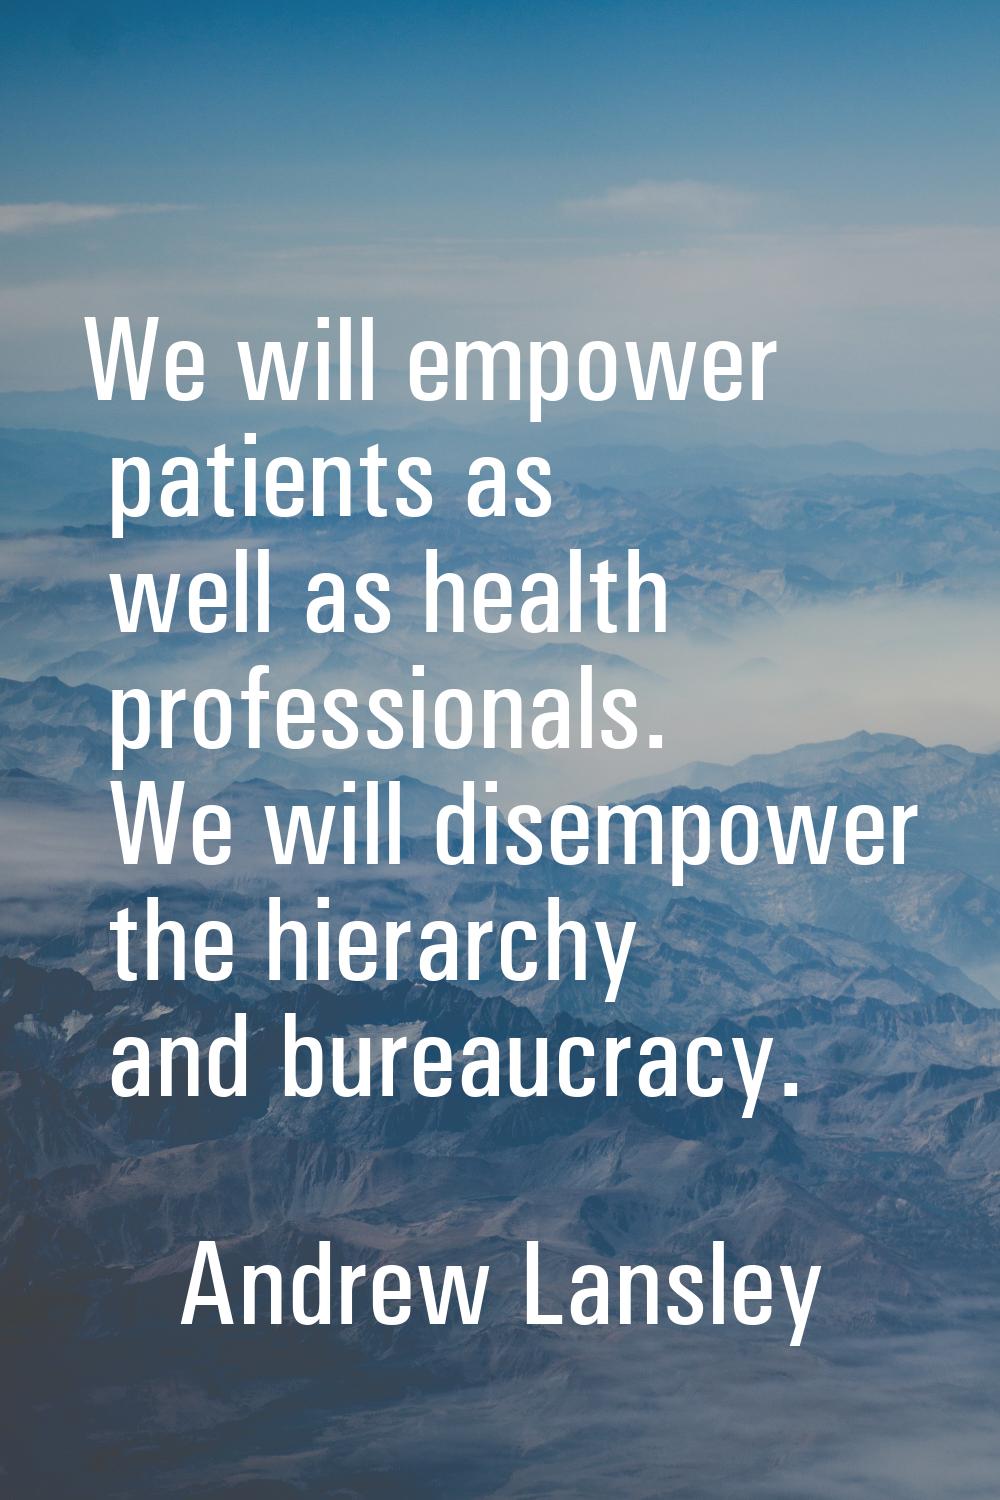 We will empower patients as well as health professionals. We will disempower the hierarchy and bure